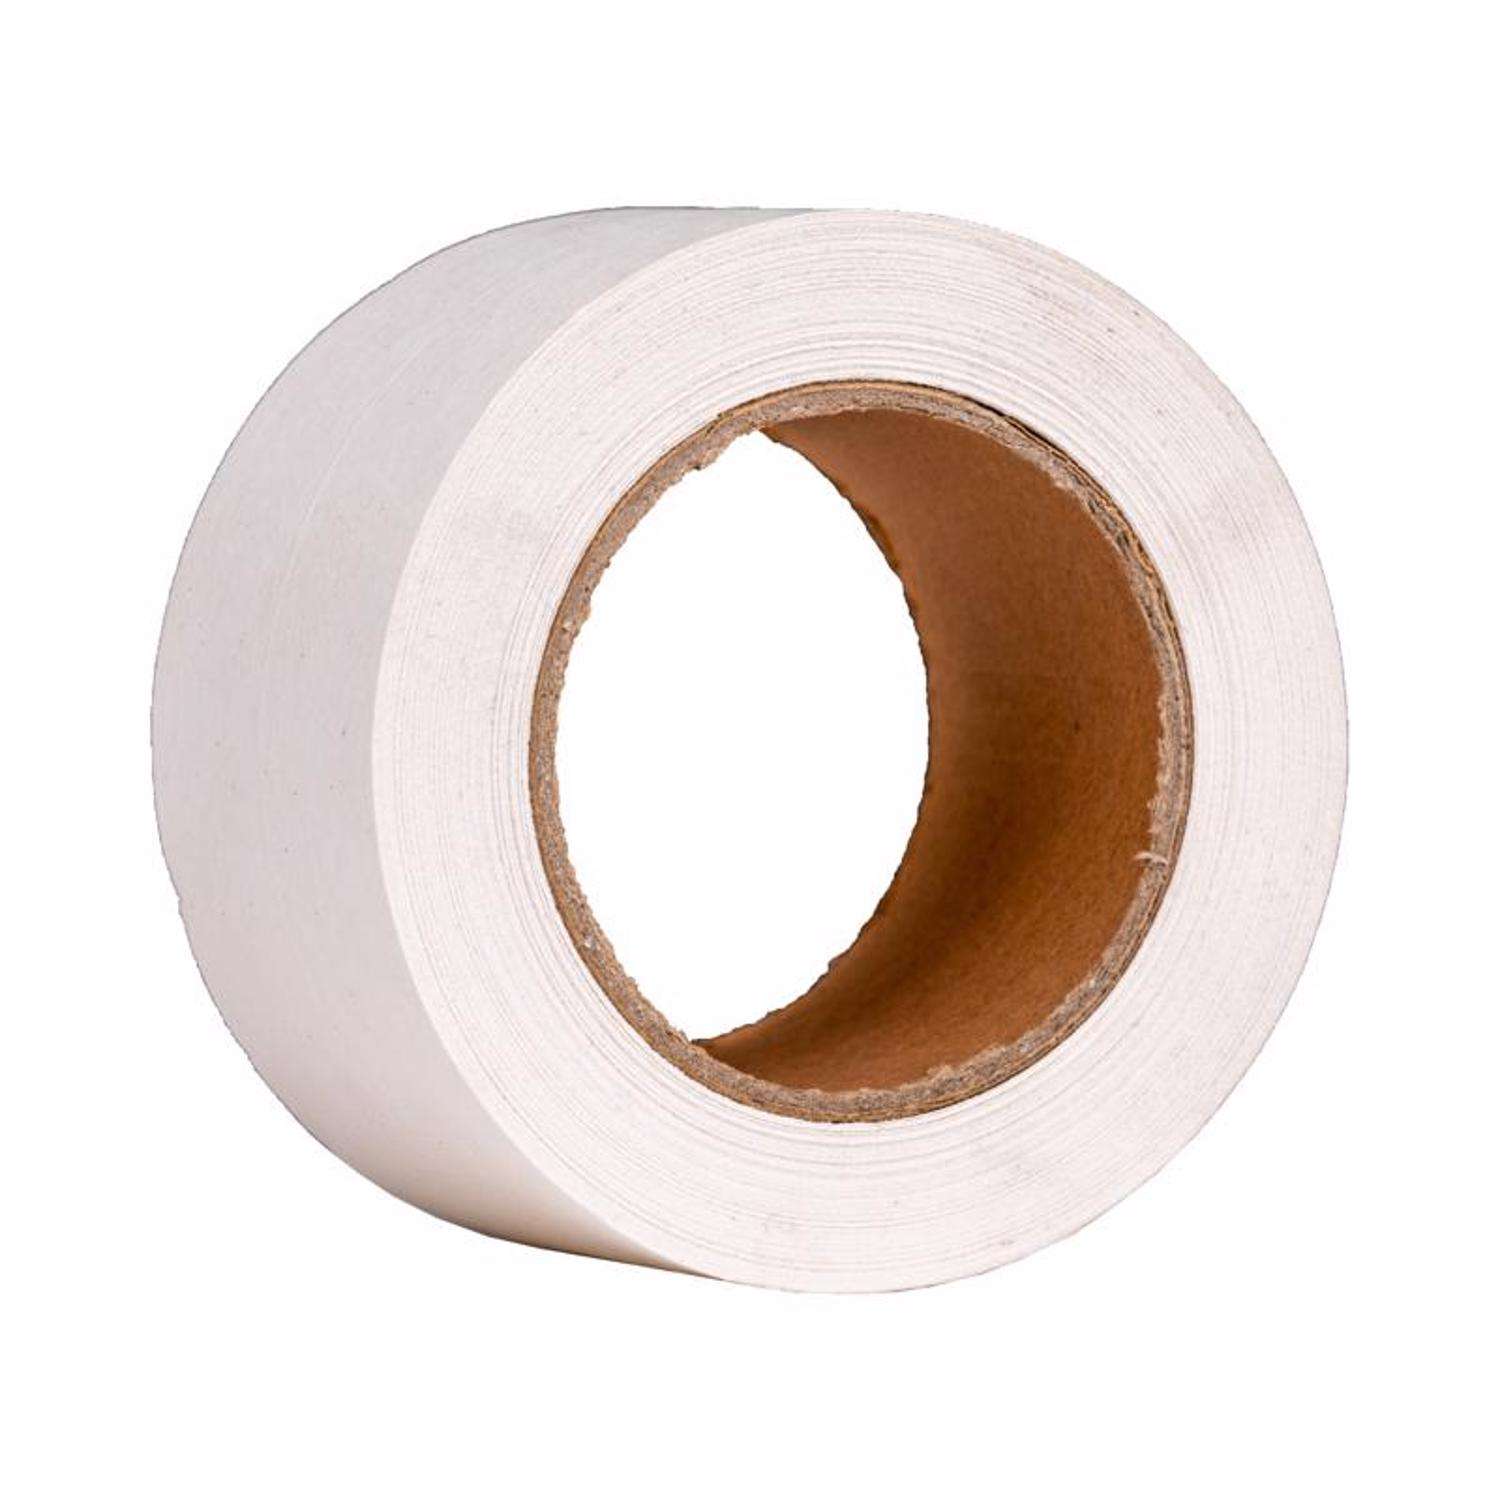 Lineco Book Repair Tape White 2in x 15 Yds – Jerrys Artist Outlet